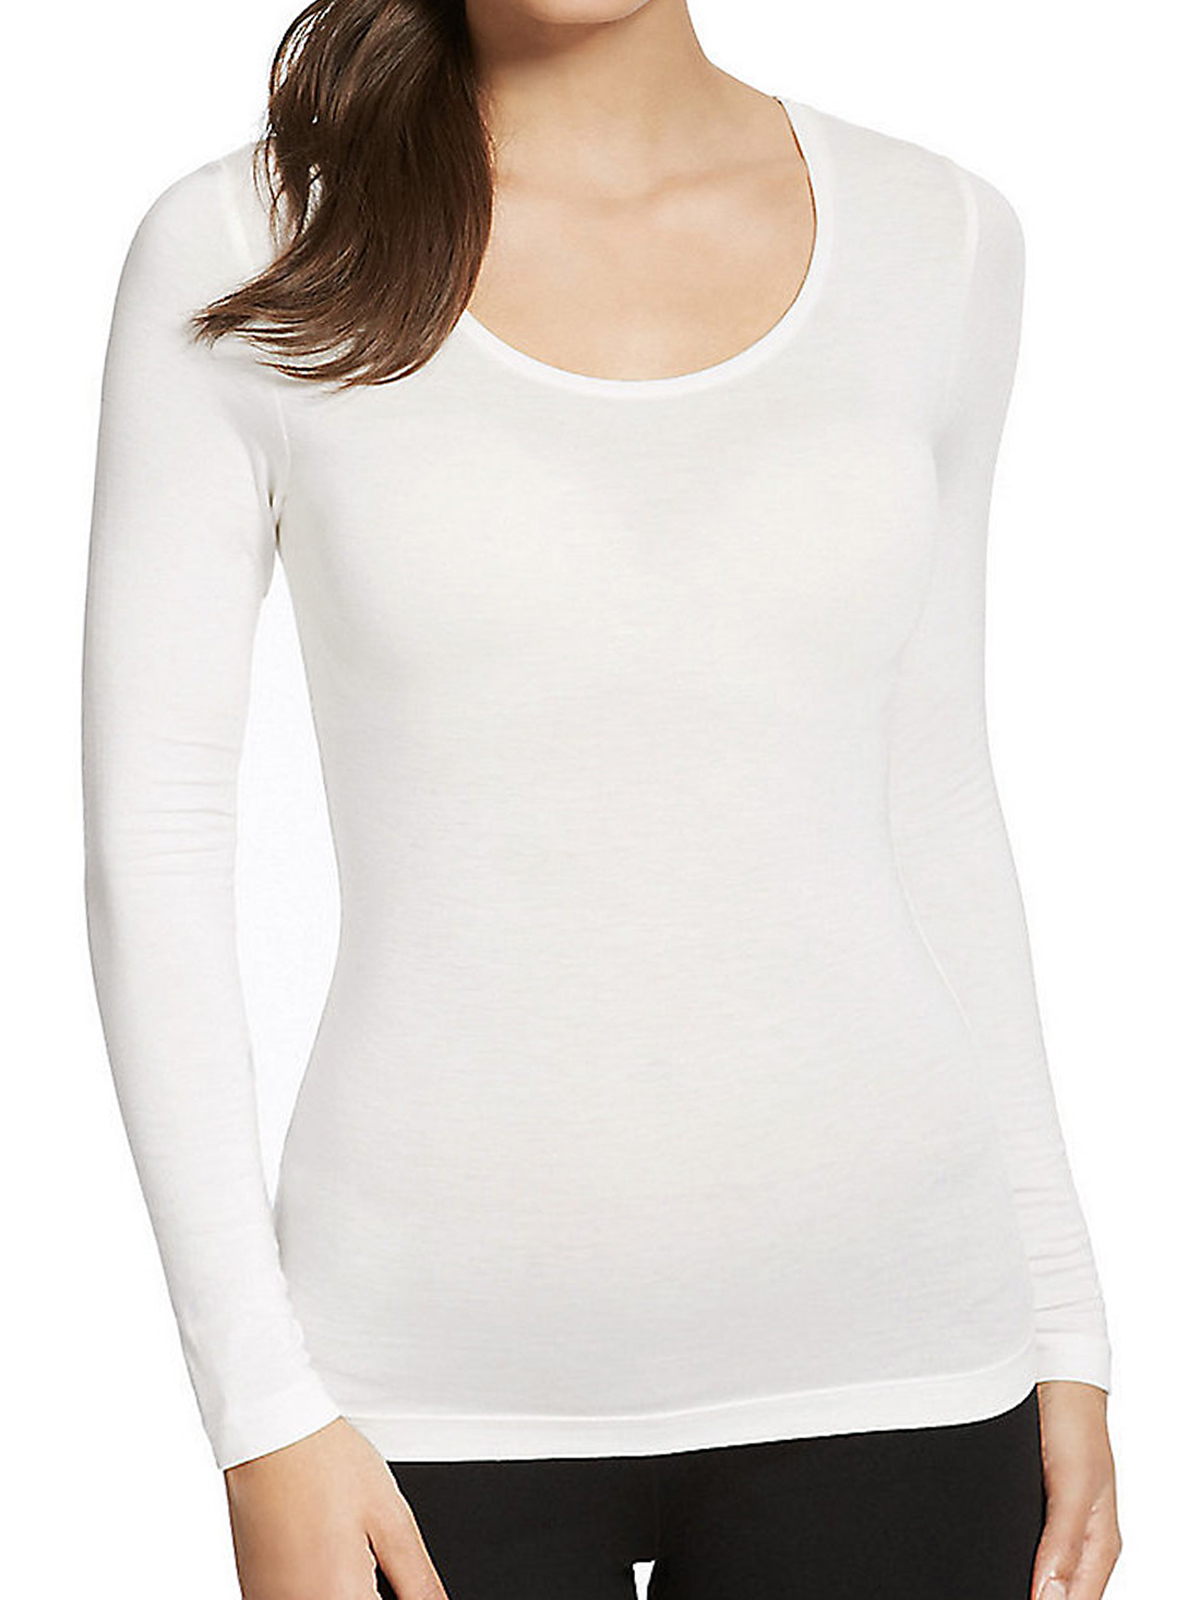 Marks and Spencer - - M&5 LIGHT-CREAM Heatgen Thermal Long Sleeve Top ...